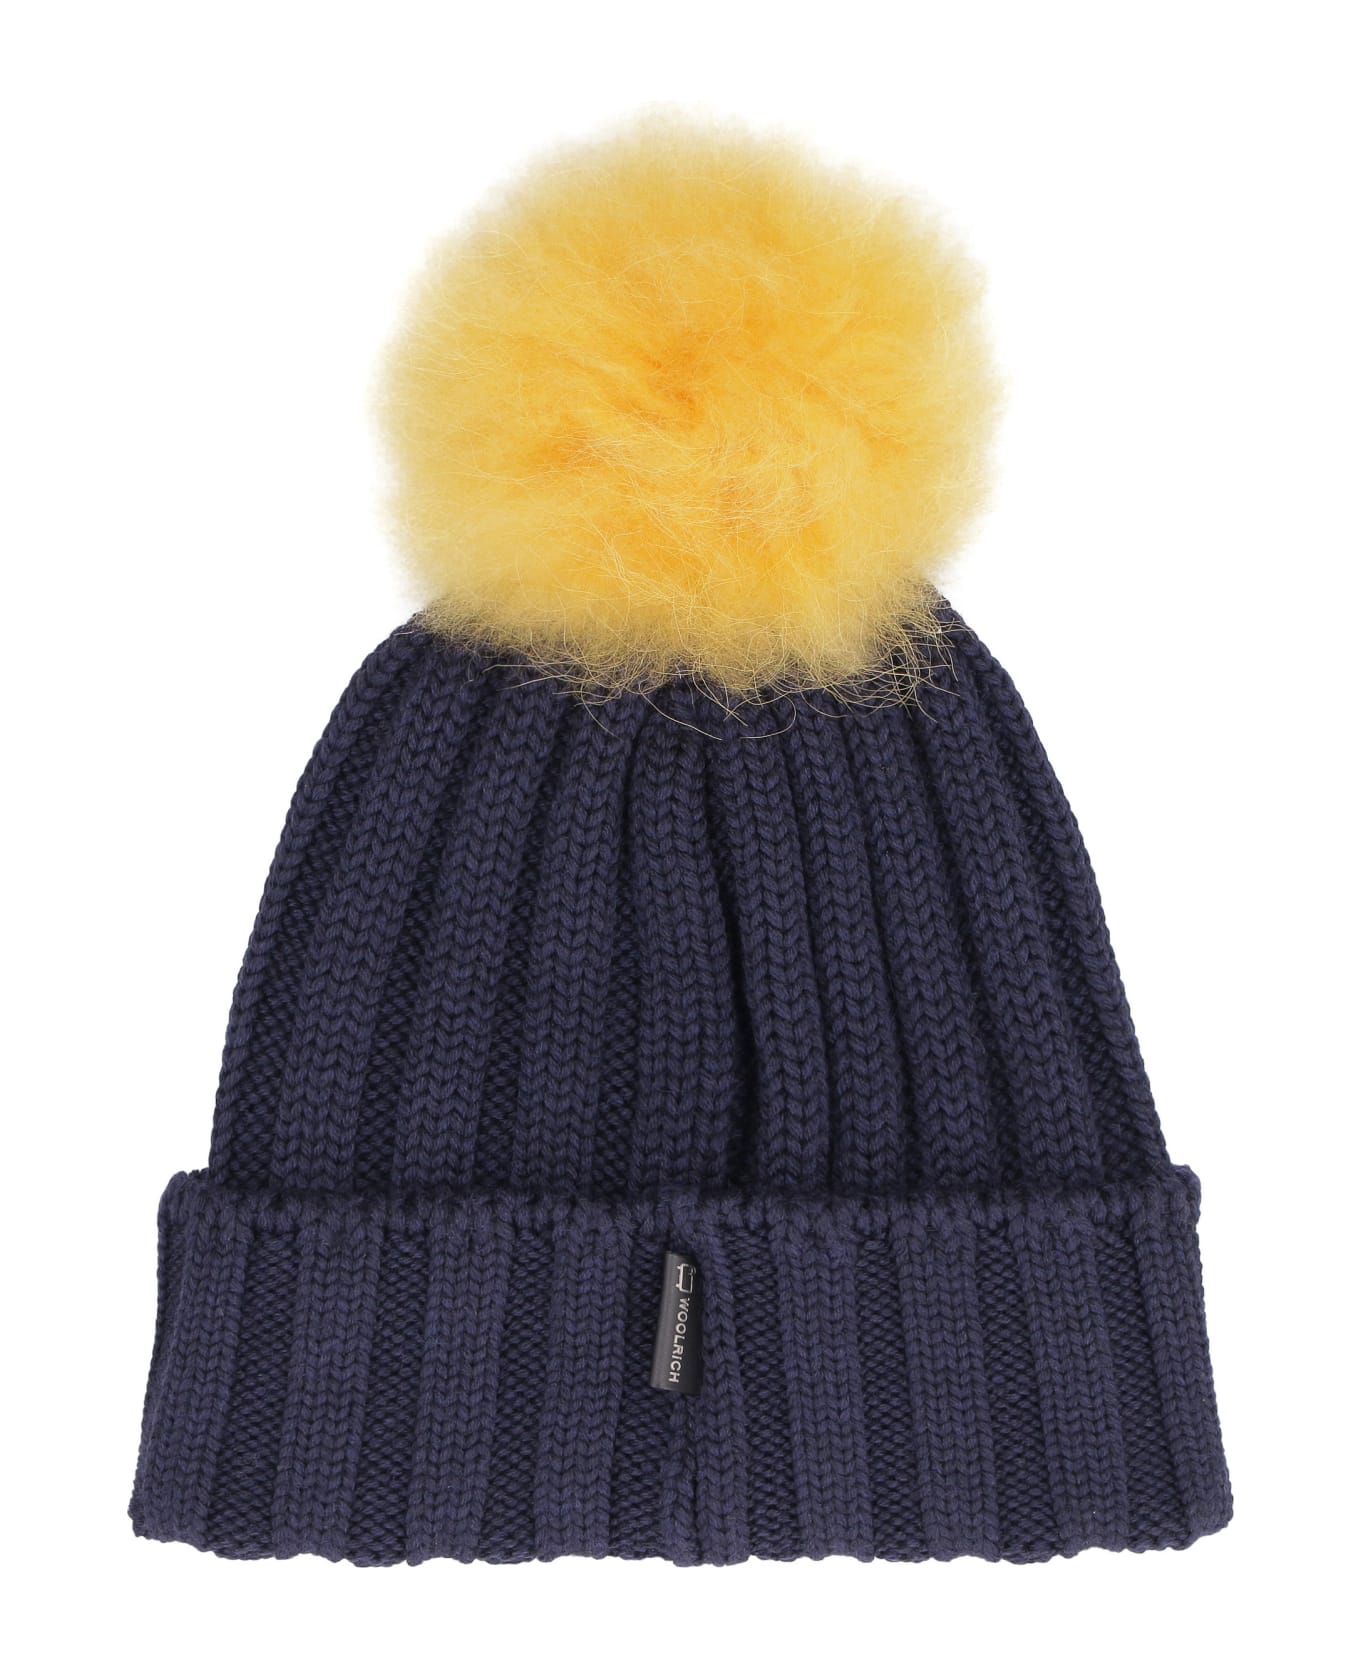 Woolrich Knitted Wool Hat With Pom-pom - blue